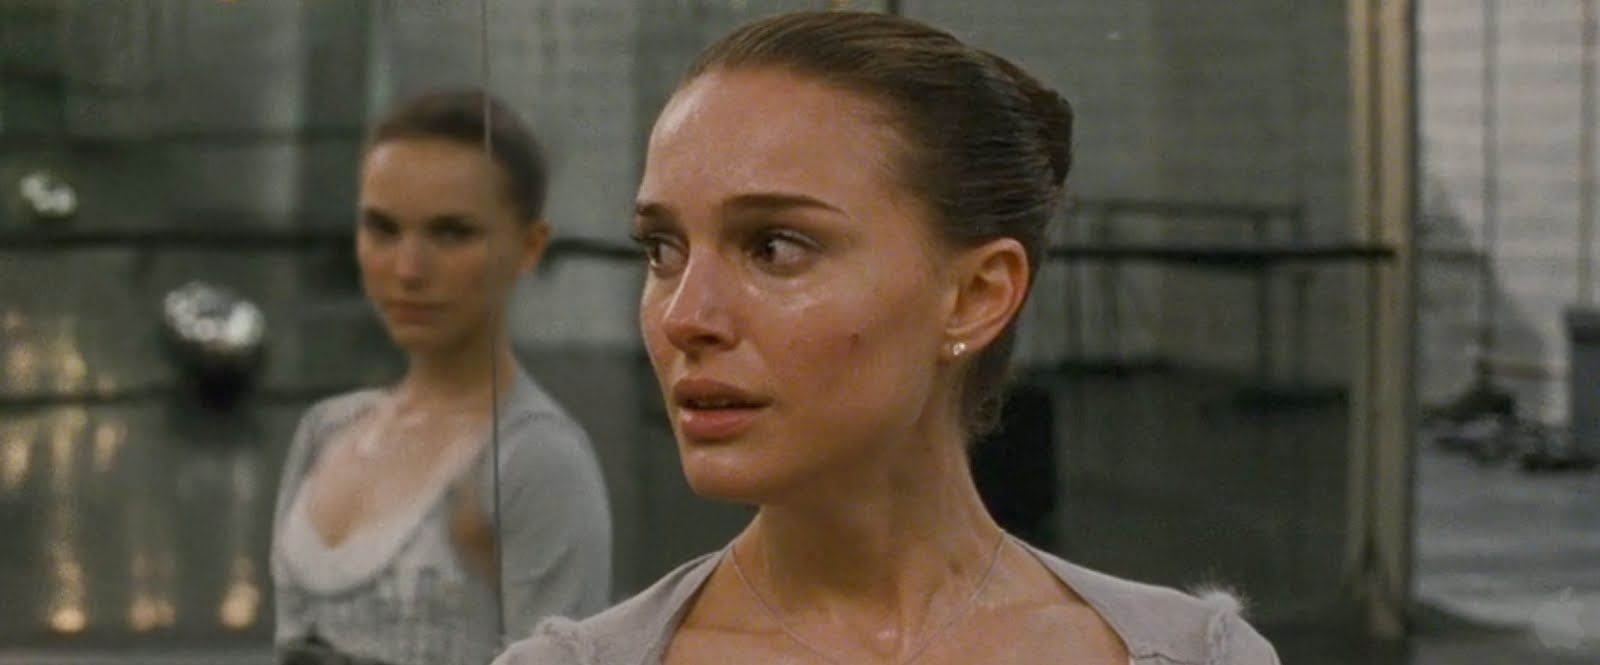 Nina Sayers (Natalie Portman) hallucinates as she is confronted with the duality of the role she has undertaken as the lead in Swan Lake.